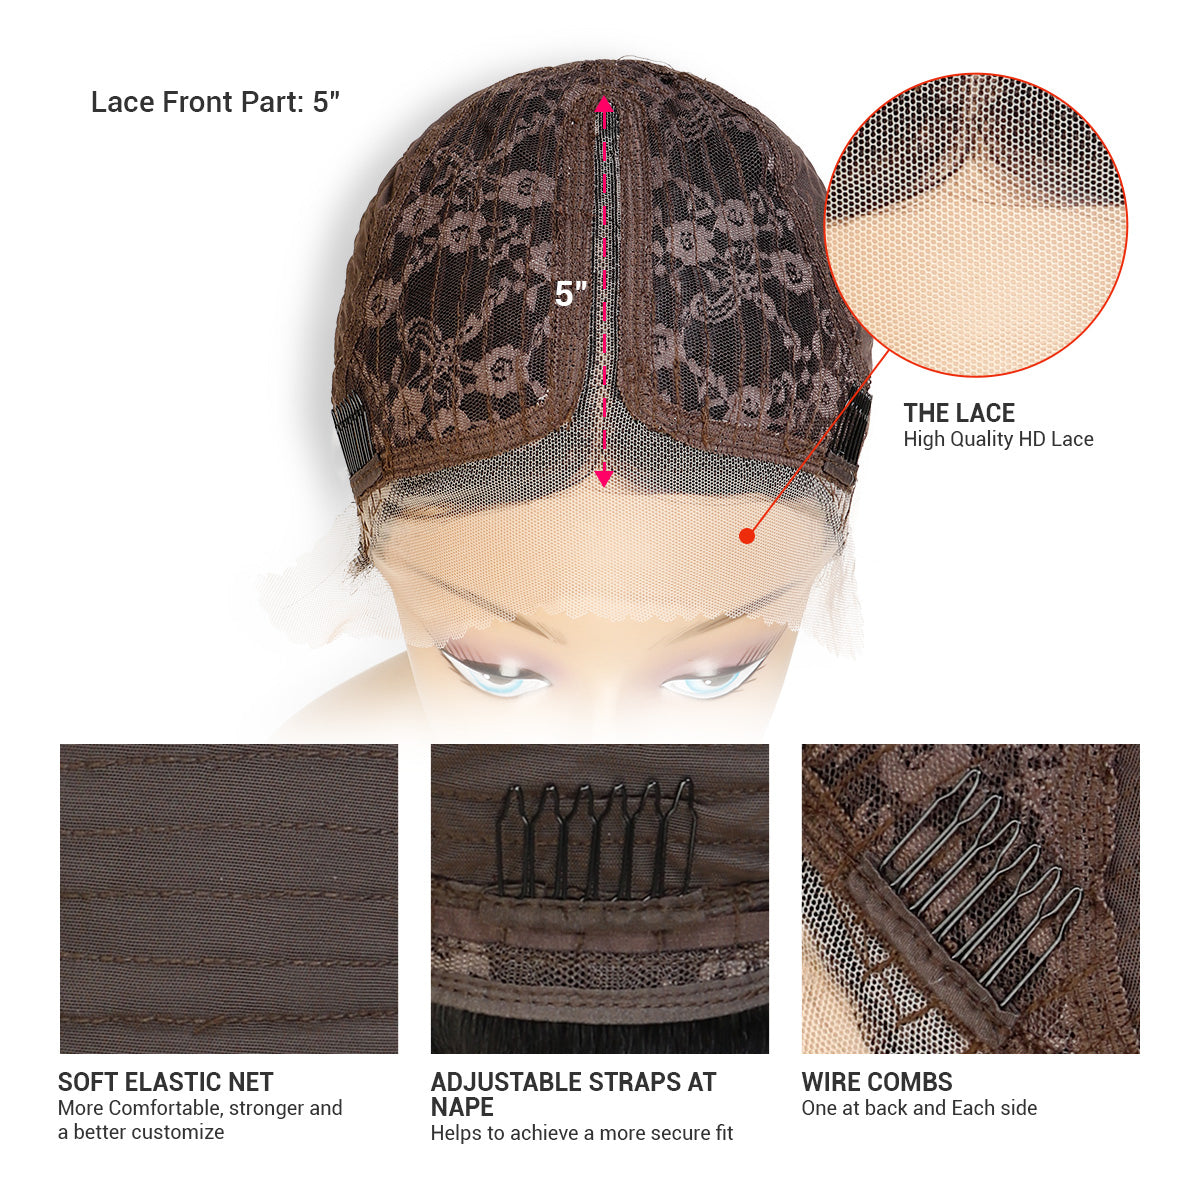 Human Hair, Lace Wig, T part, Deep pLace Front Part 5", High quality HD Lace, Soft Elastic Net, More comfortable, stronger and a better customize, Adjustable straps at nape, Helps to a more secure fit, Wire combs, One at back and Each side, Cap view